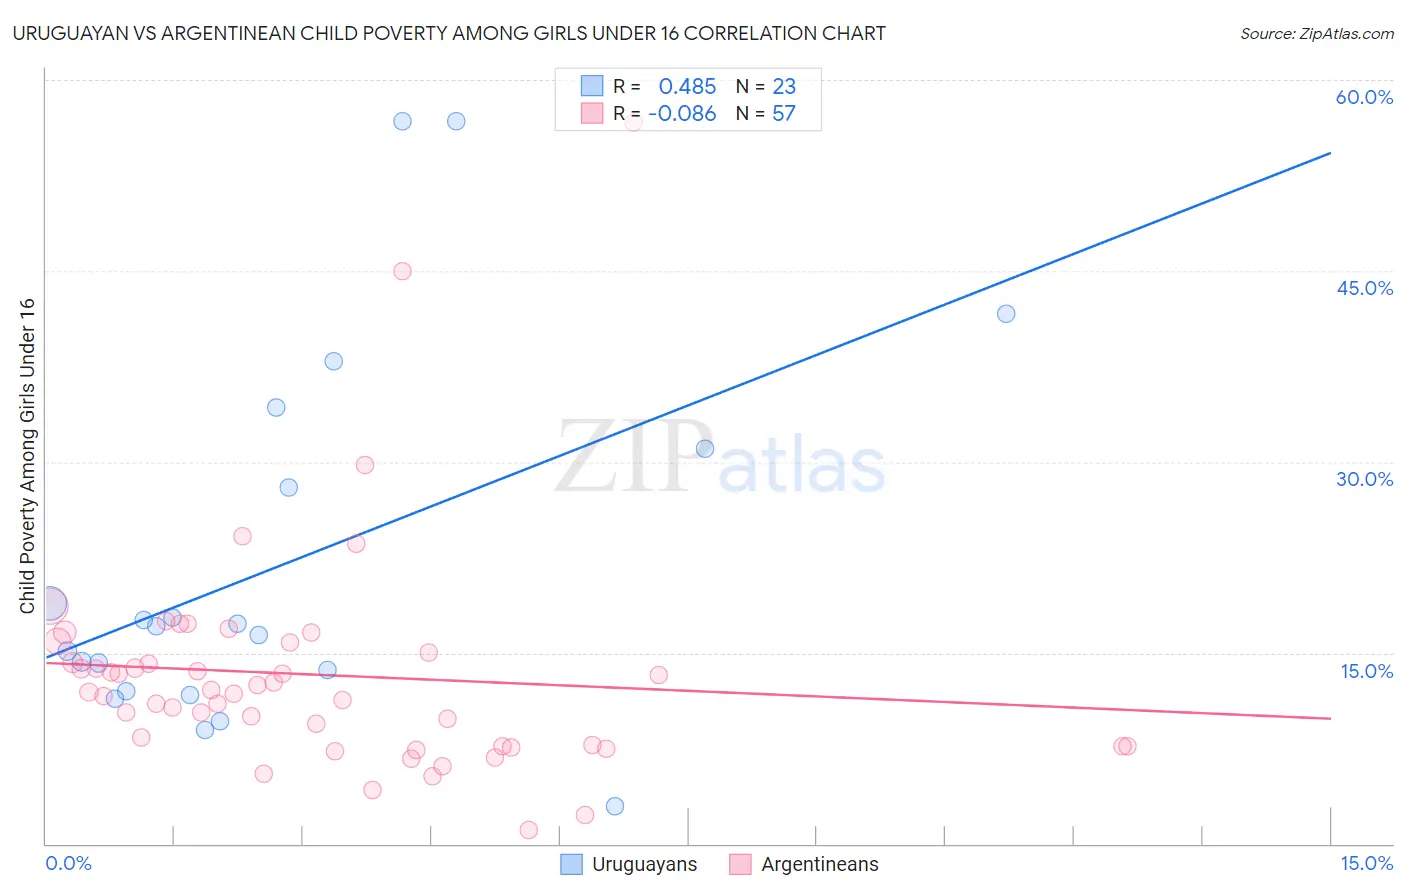 Uruguayan vs Argentinean Child Poverty Among Girls Under 16